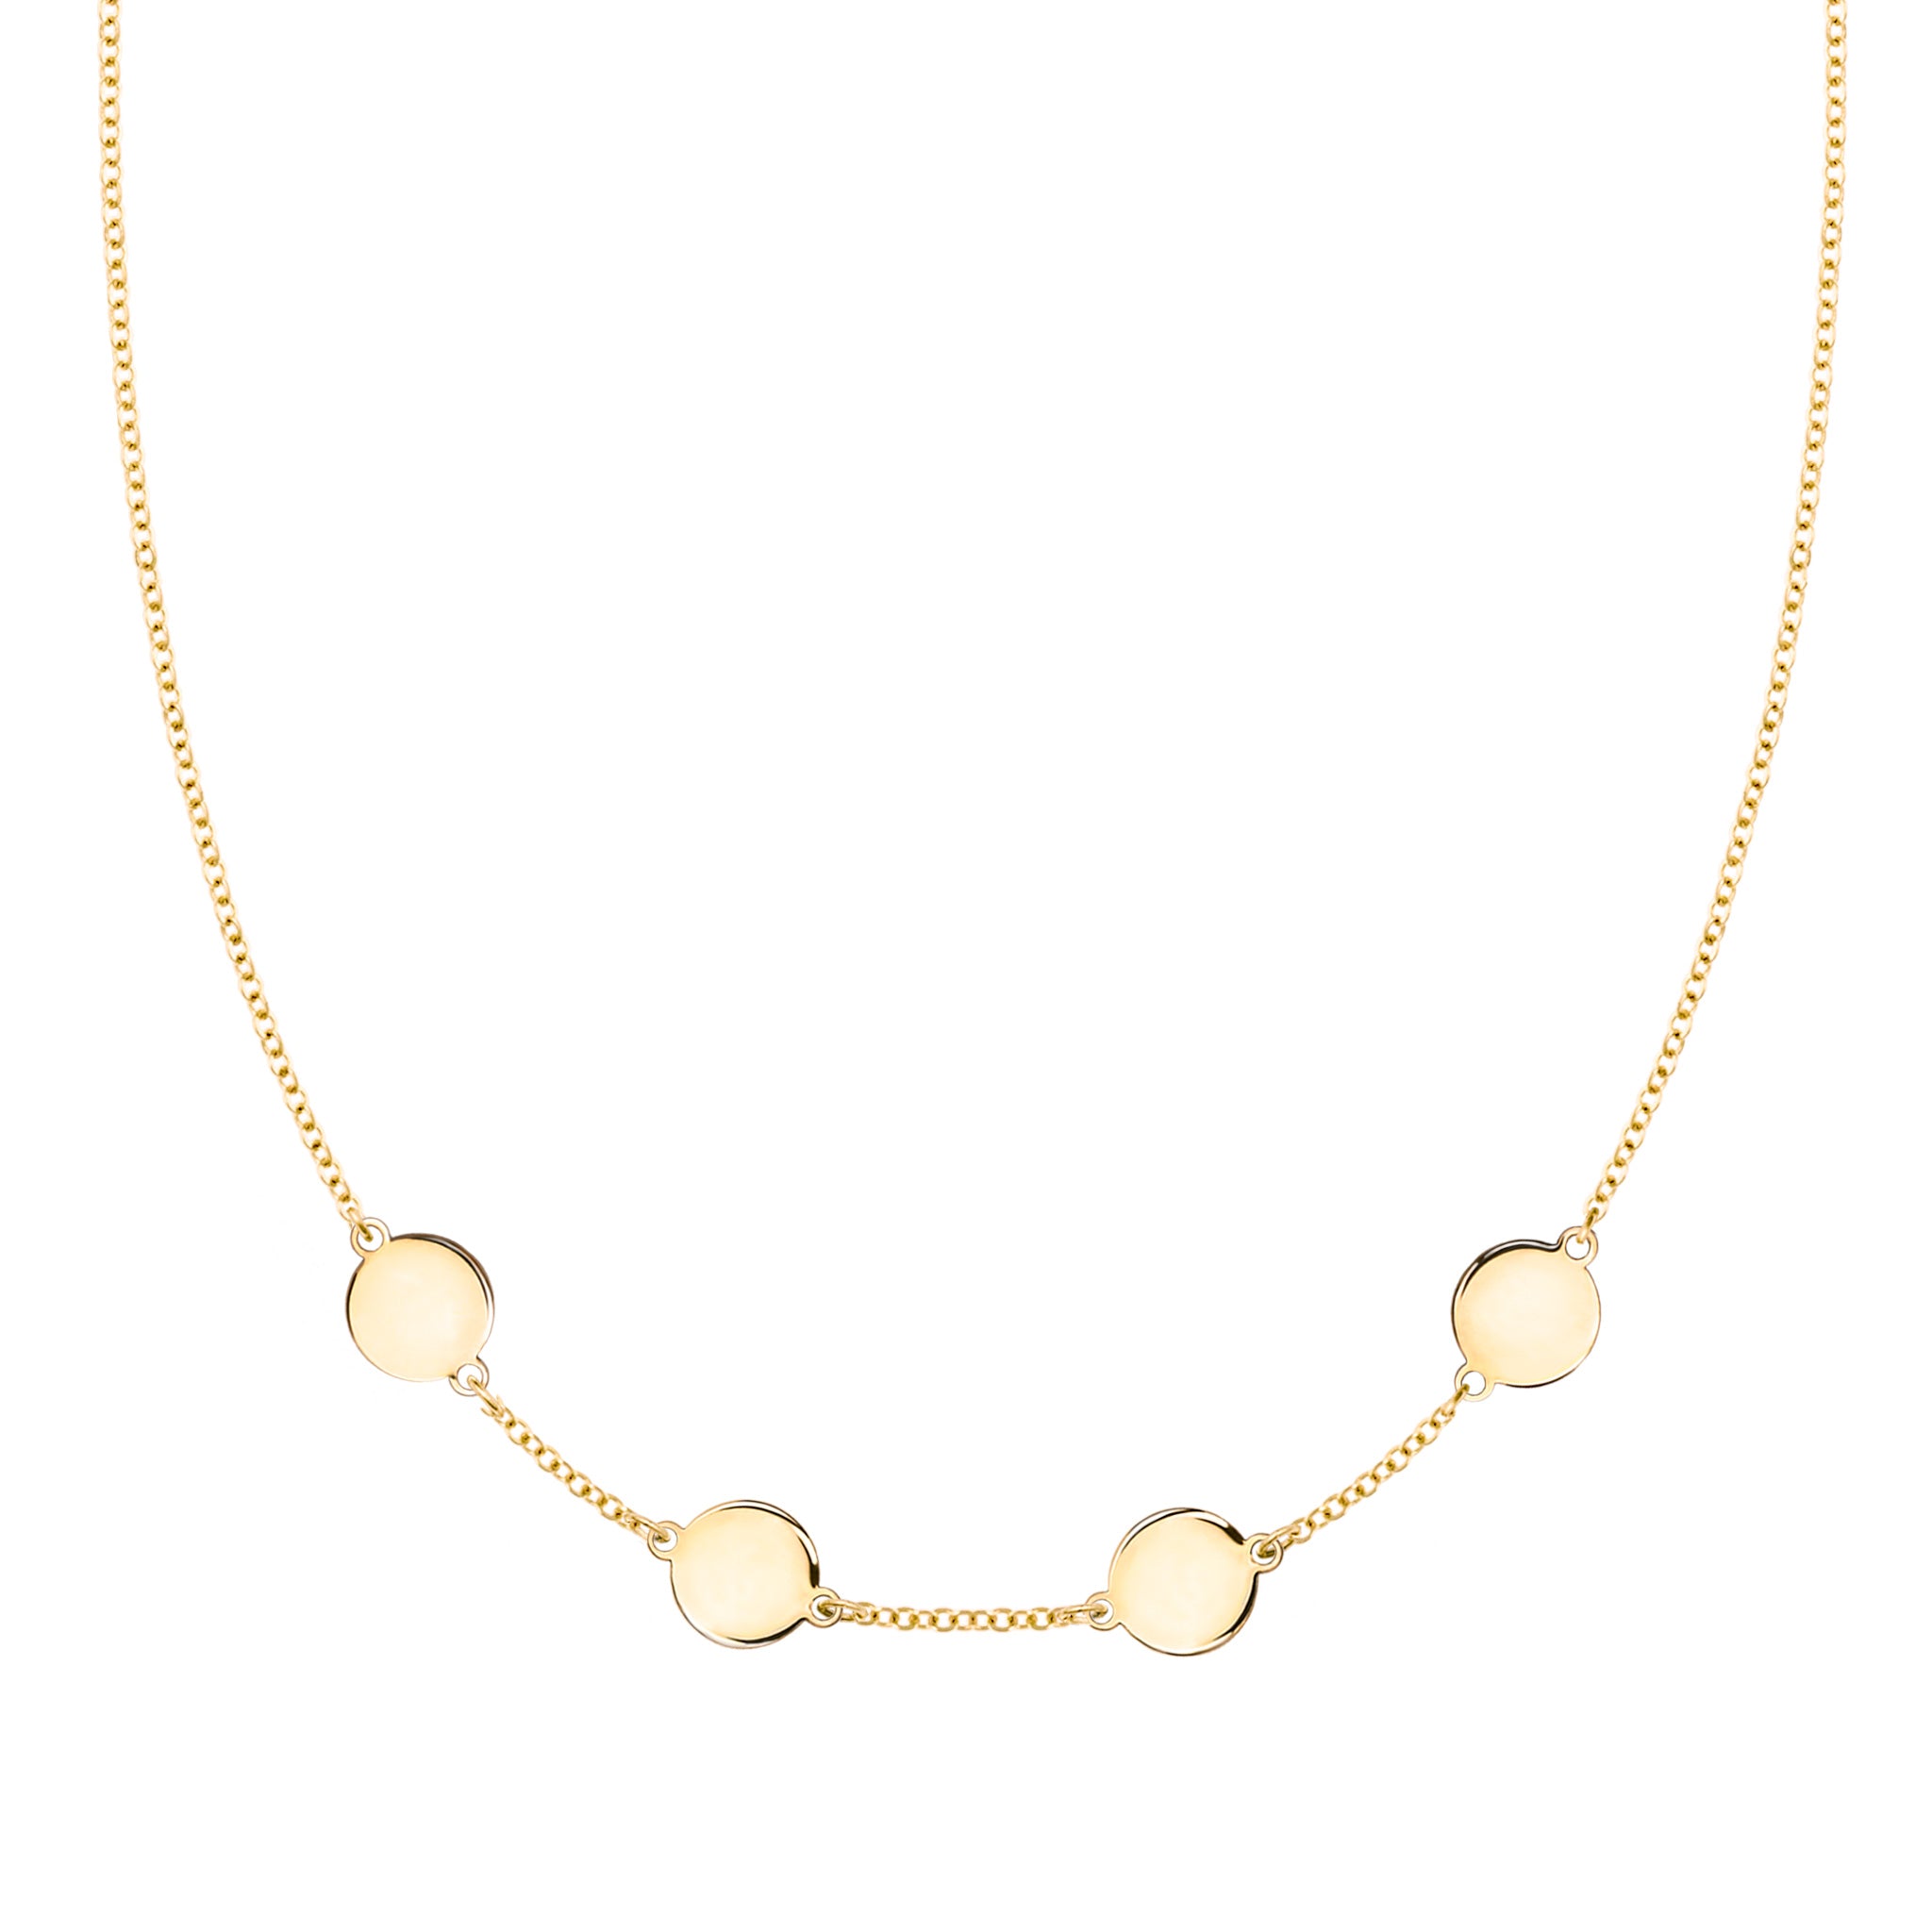 Personalized 4 Letter Necklace in 14k Gold (Single Spacing)